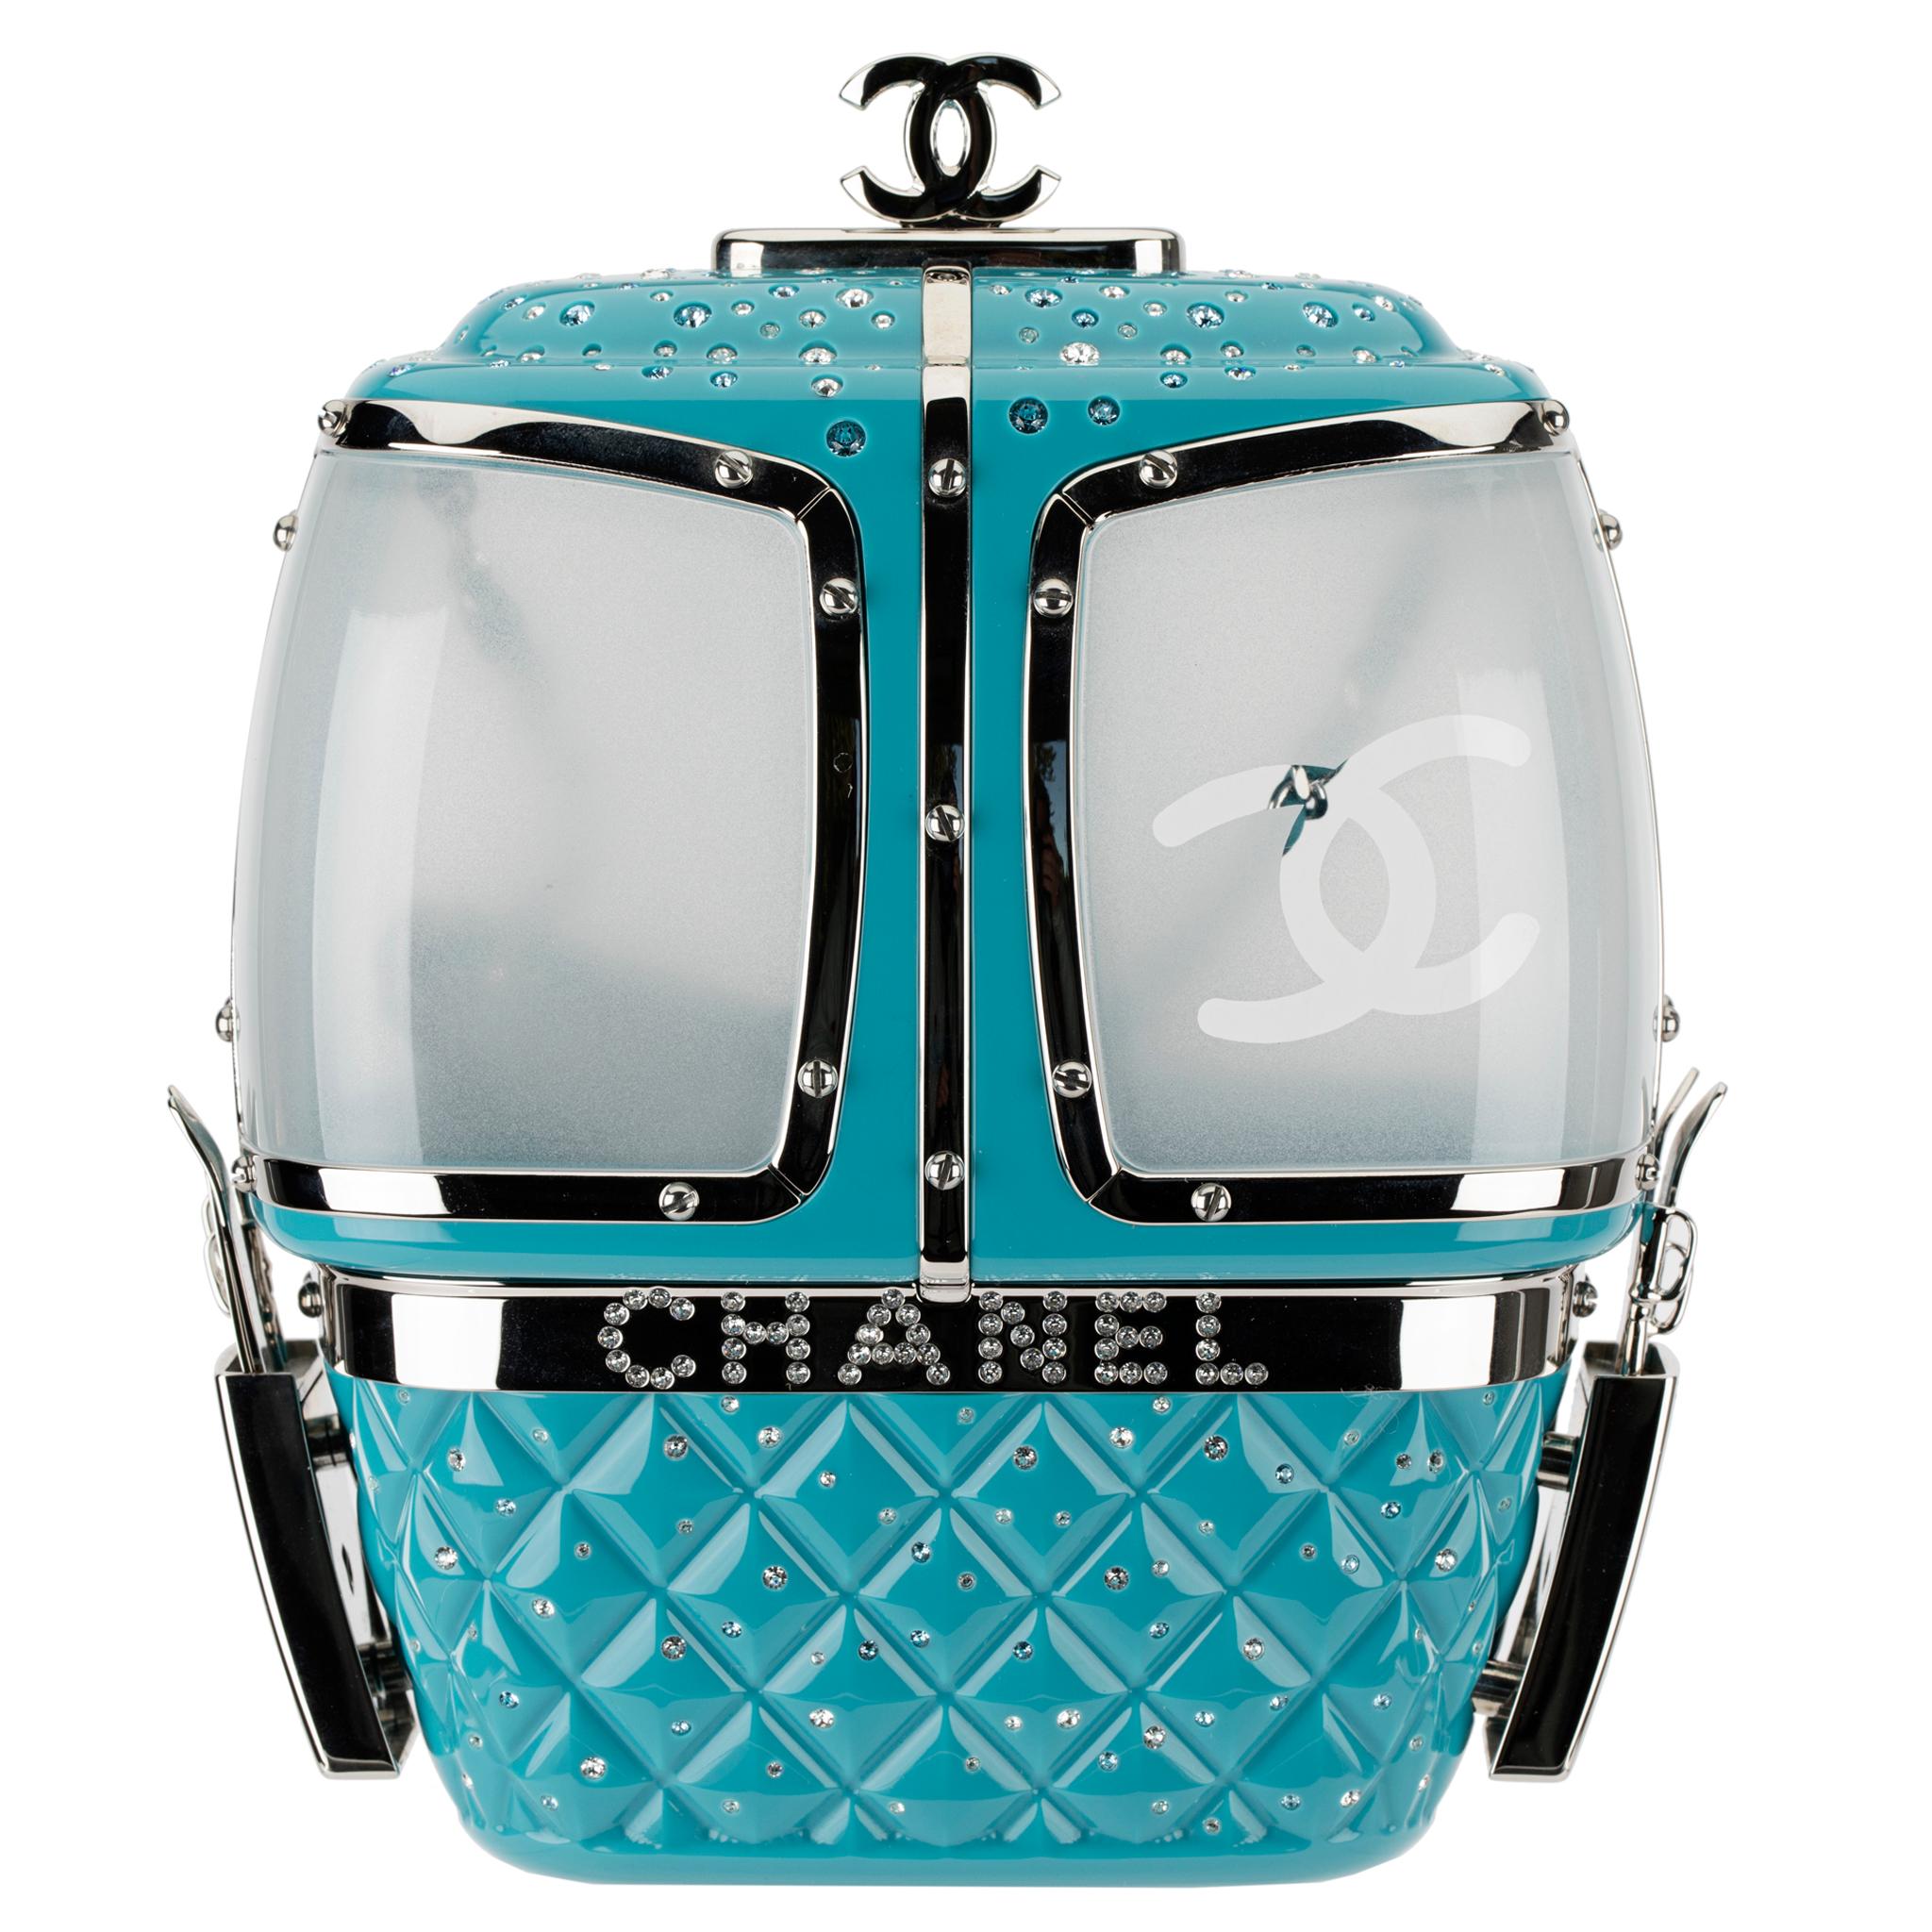 This Ski Gondola Minaudière or, more familiarly known known as a cable cars, from the ski resort themed Fall/Winter 2019 collection is made from turquoise lucite, with silver tone hardware and rhinestones decorated throughout. Look closely, and